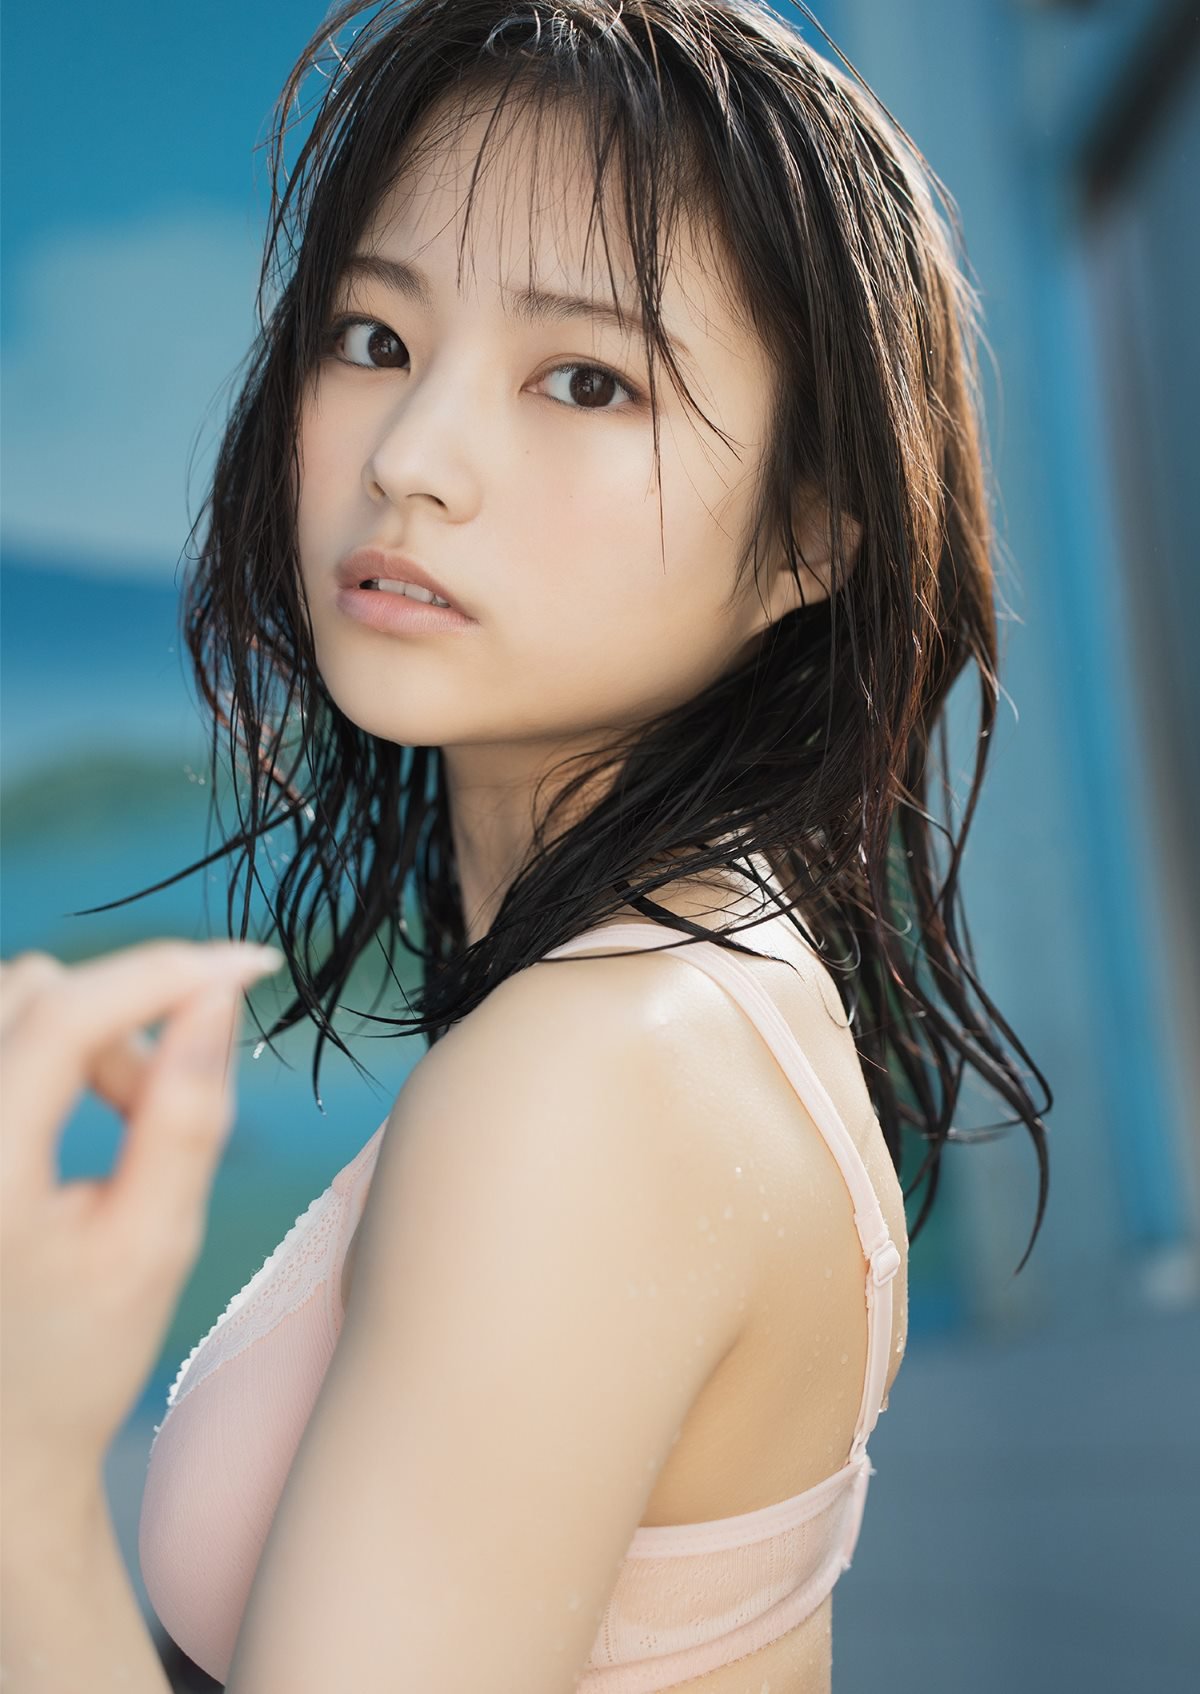 YJ Photobook Usa 宇咲 The only daughter of a public bath is training as a trimmer 銭湯のひとり娘は、トリマー修行中 2022 04 21 0011 8346511554.jpg